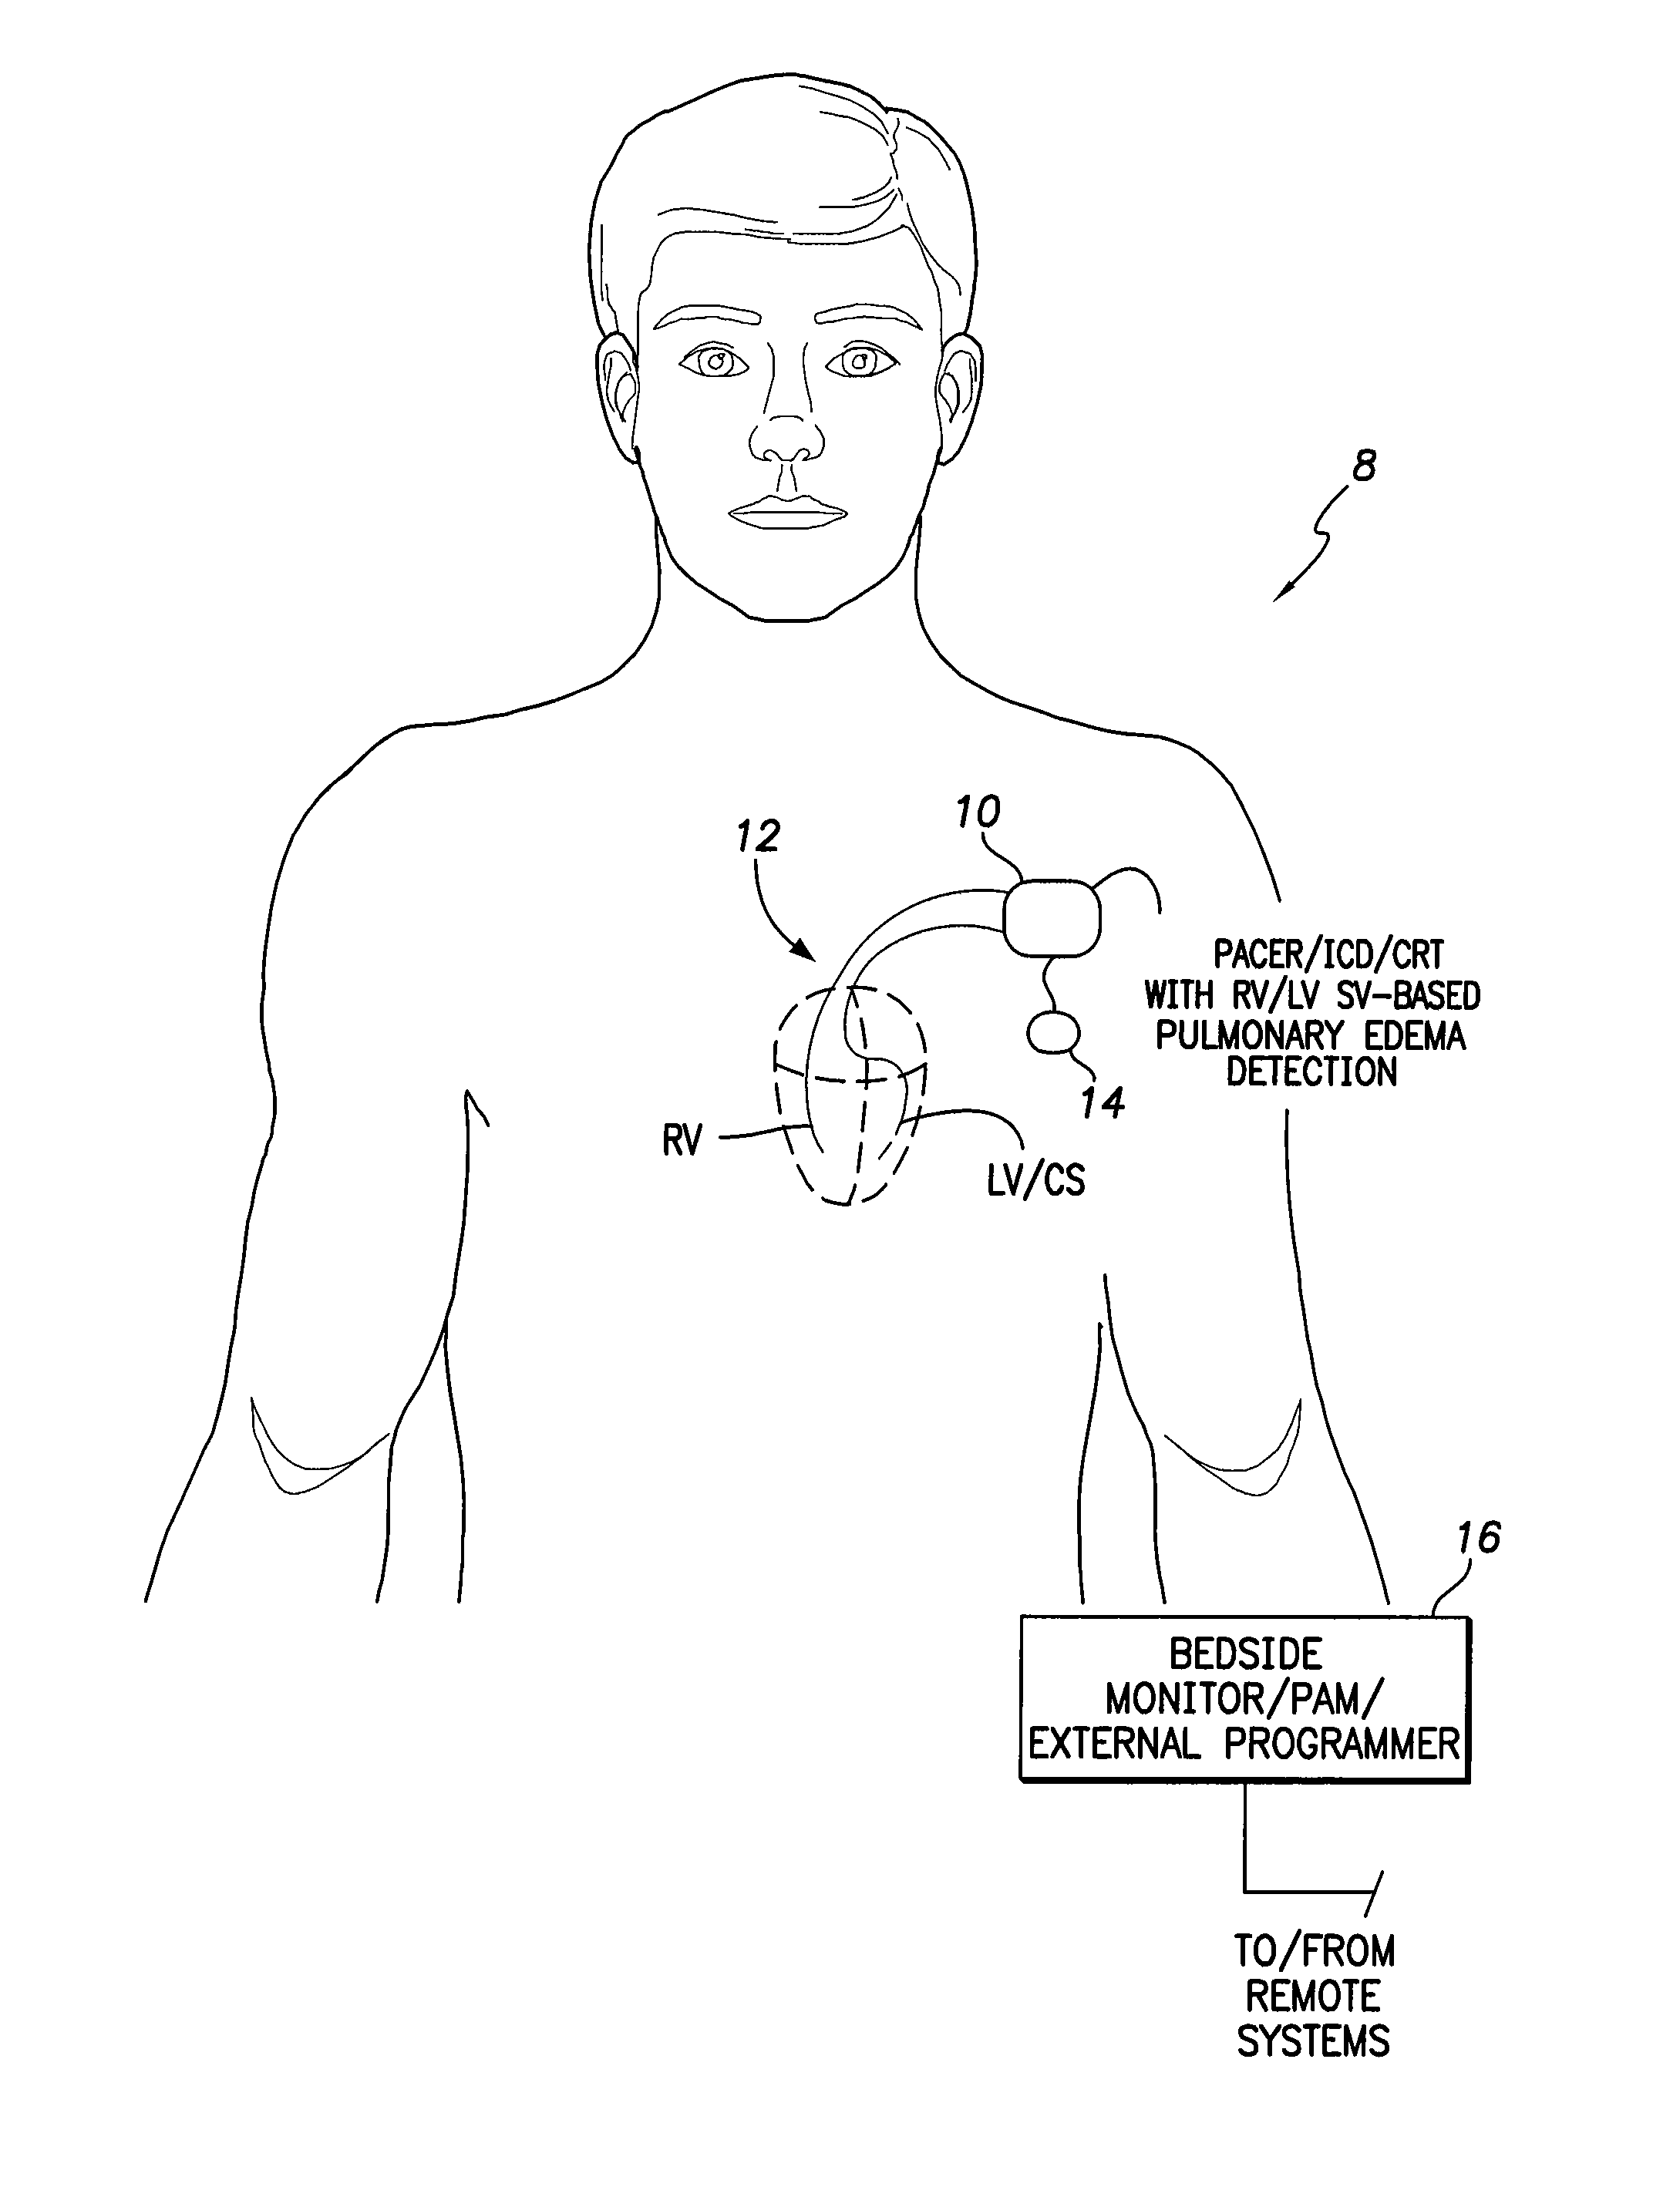 System and method for detecting pulmonary congestion based on stroke volume using an implantable medical device